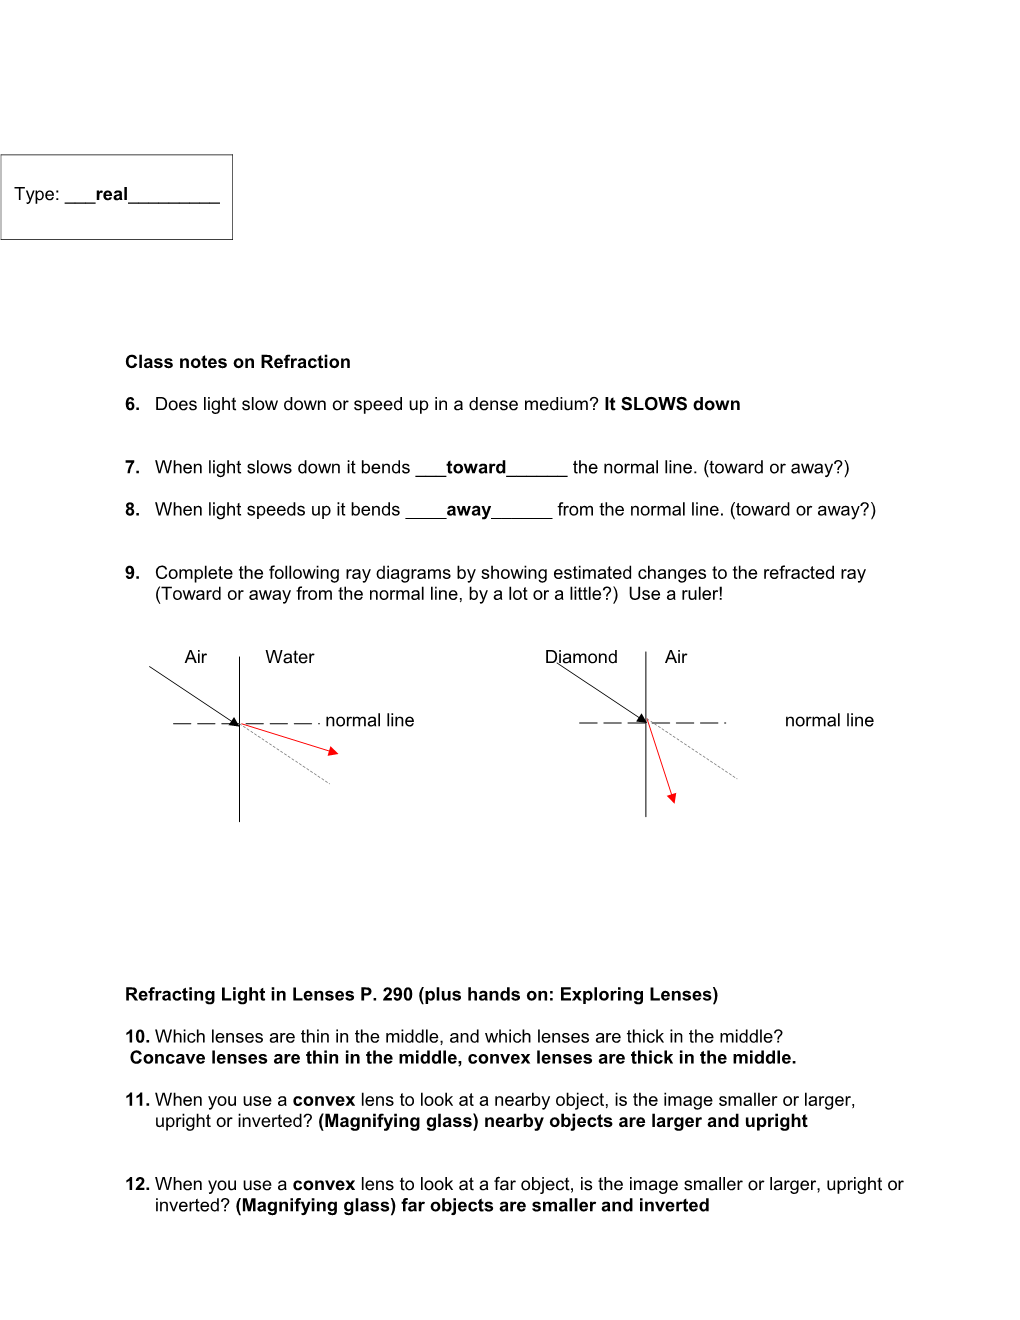 Quiz Review Vision, Refraction and Reflection